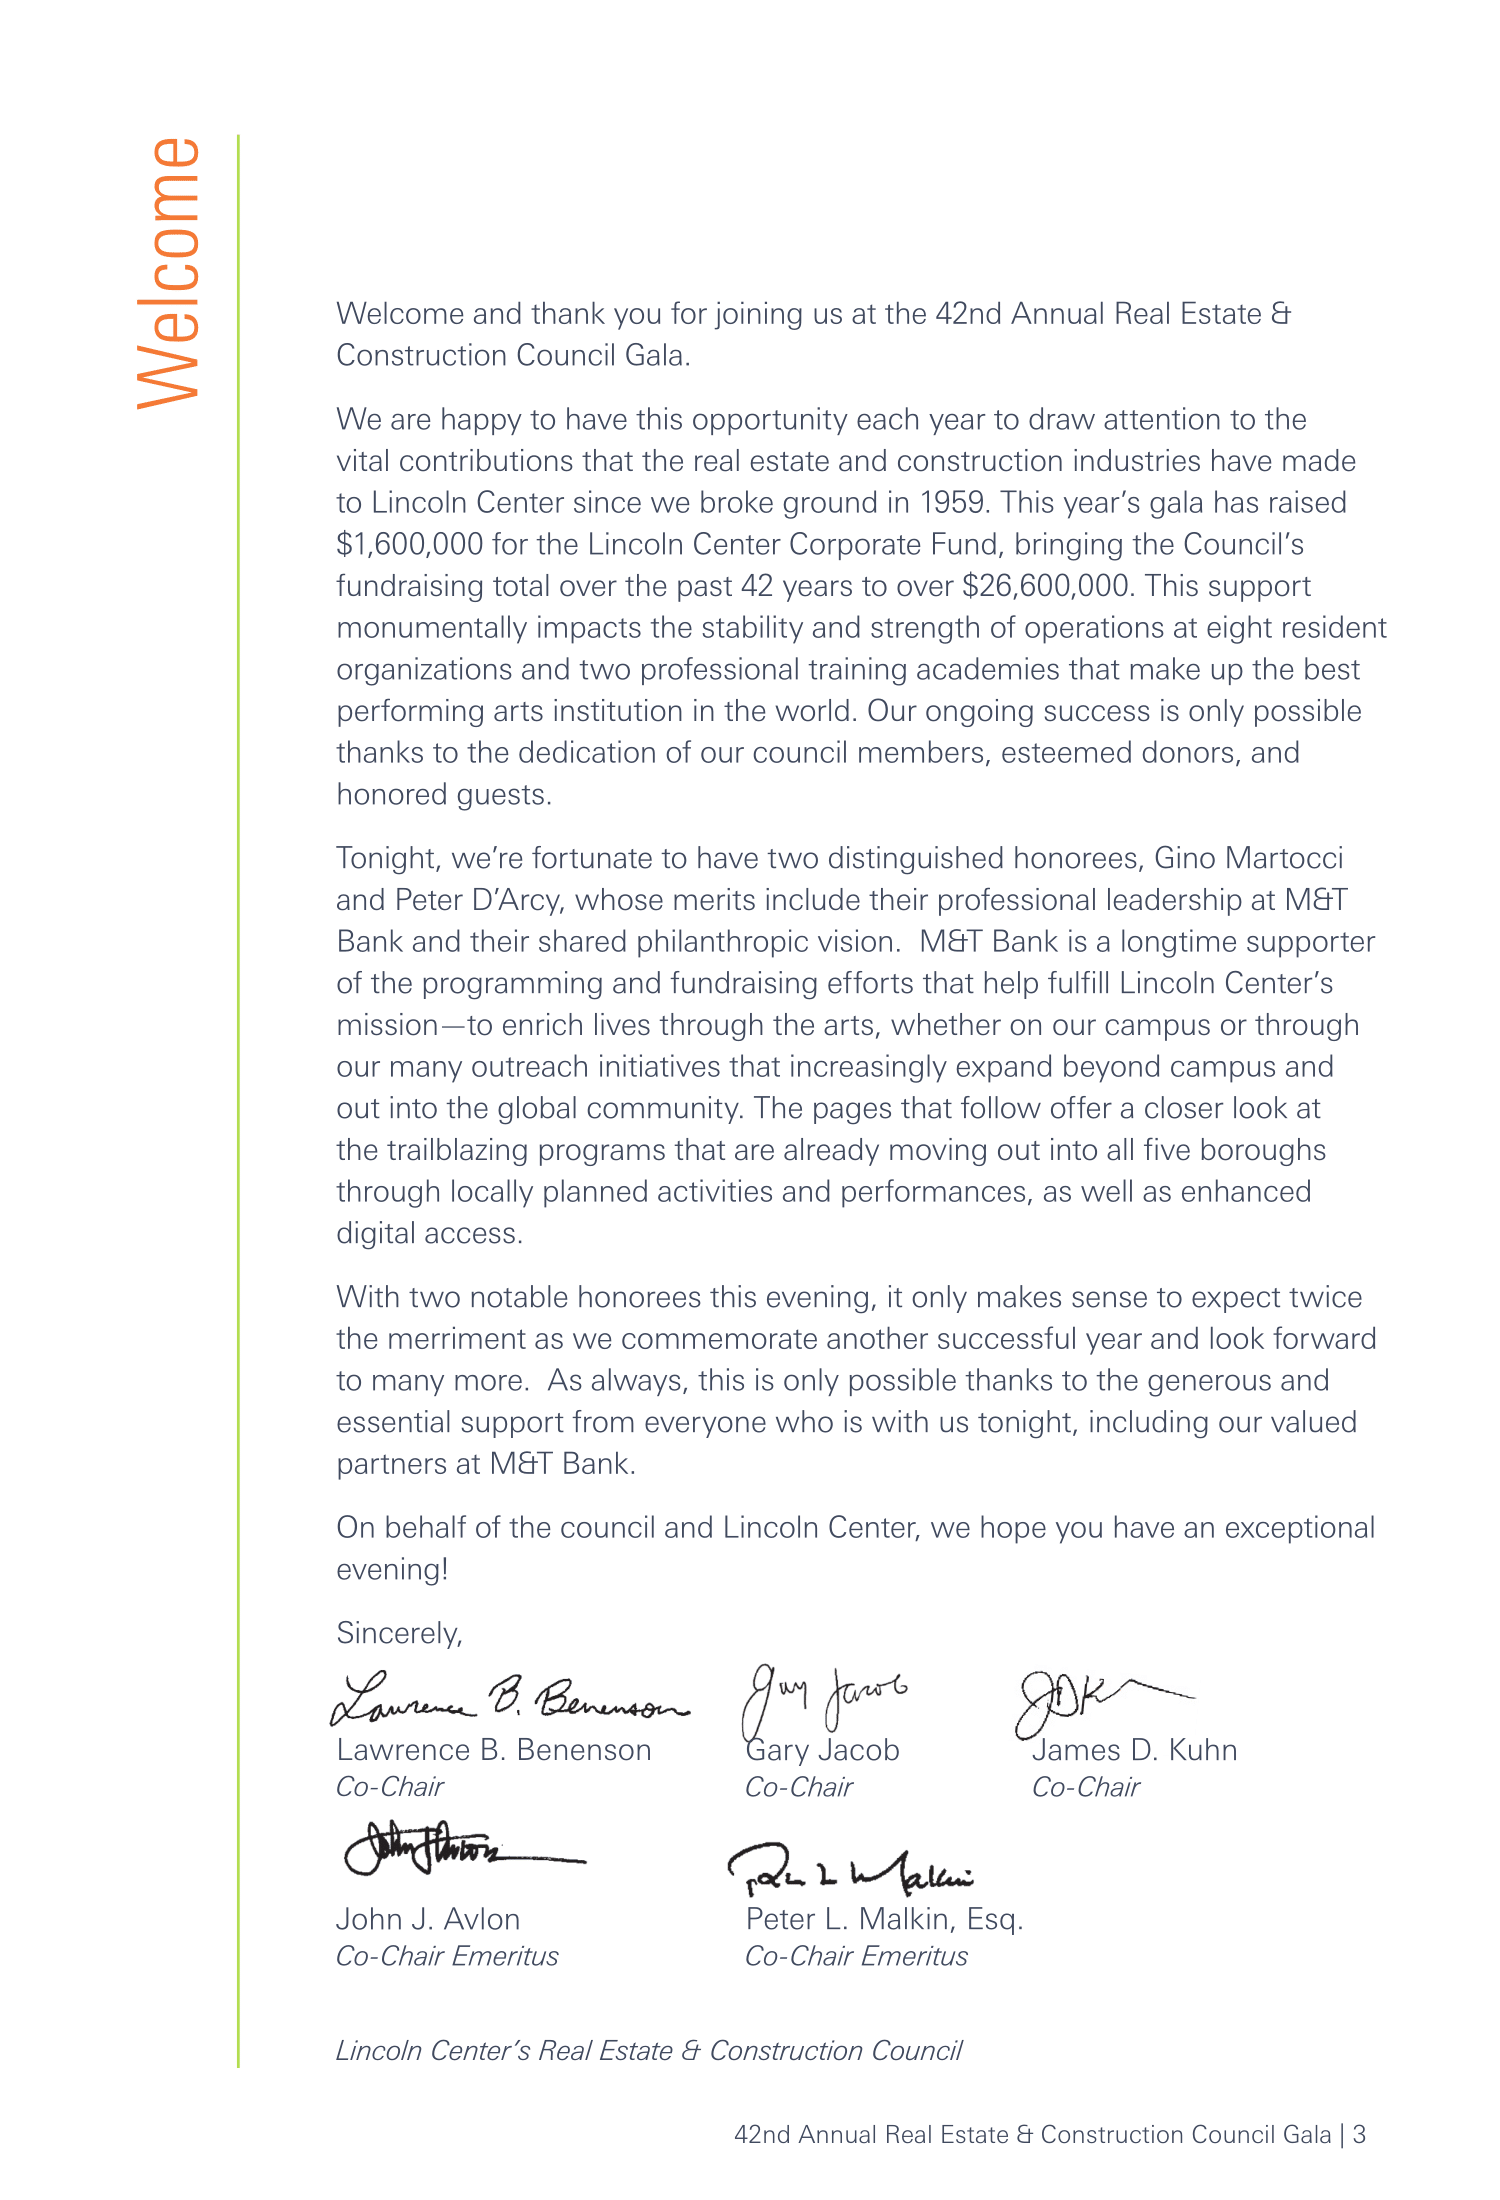 fundraising letters stack-3.png